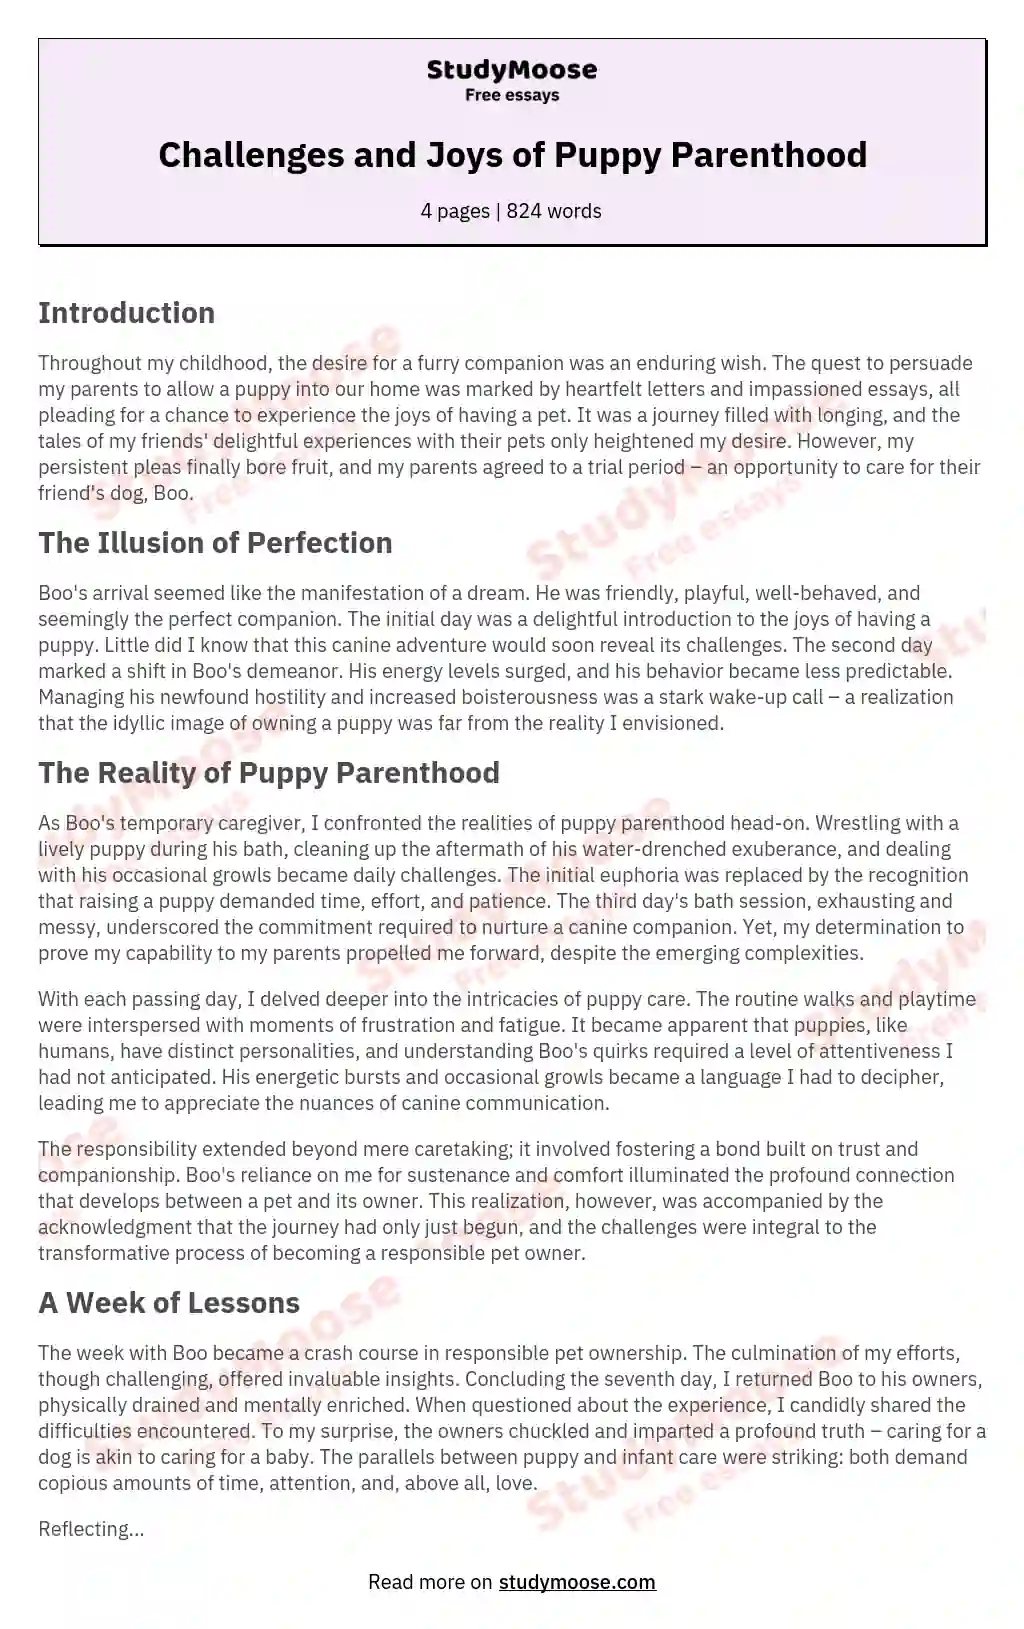 Challenges and Joys of Puppy Parenthood essay